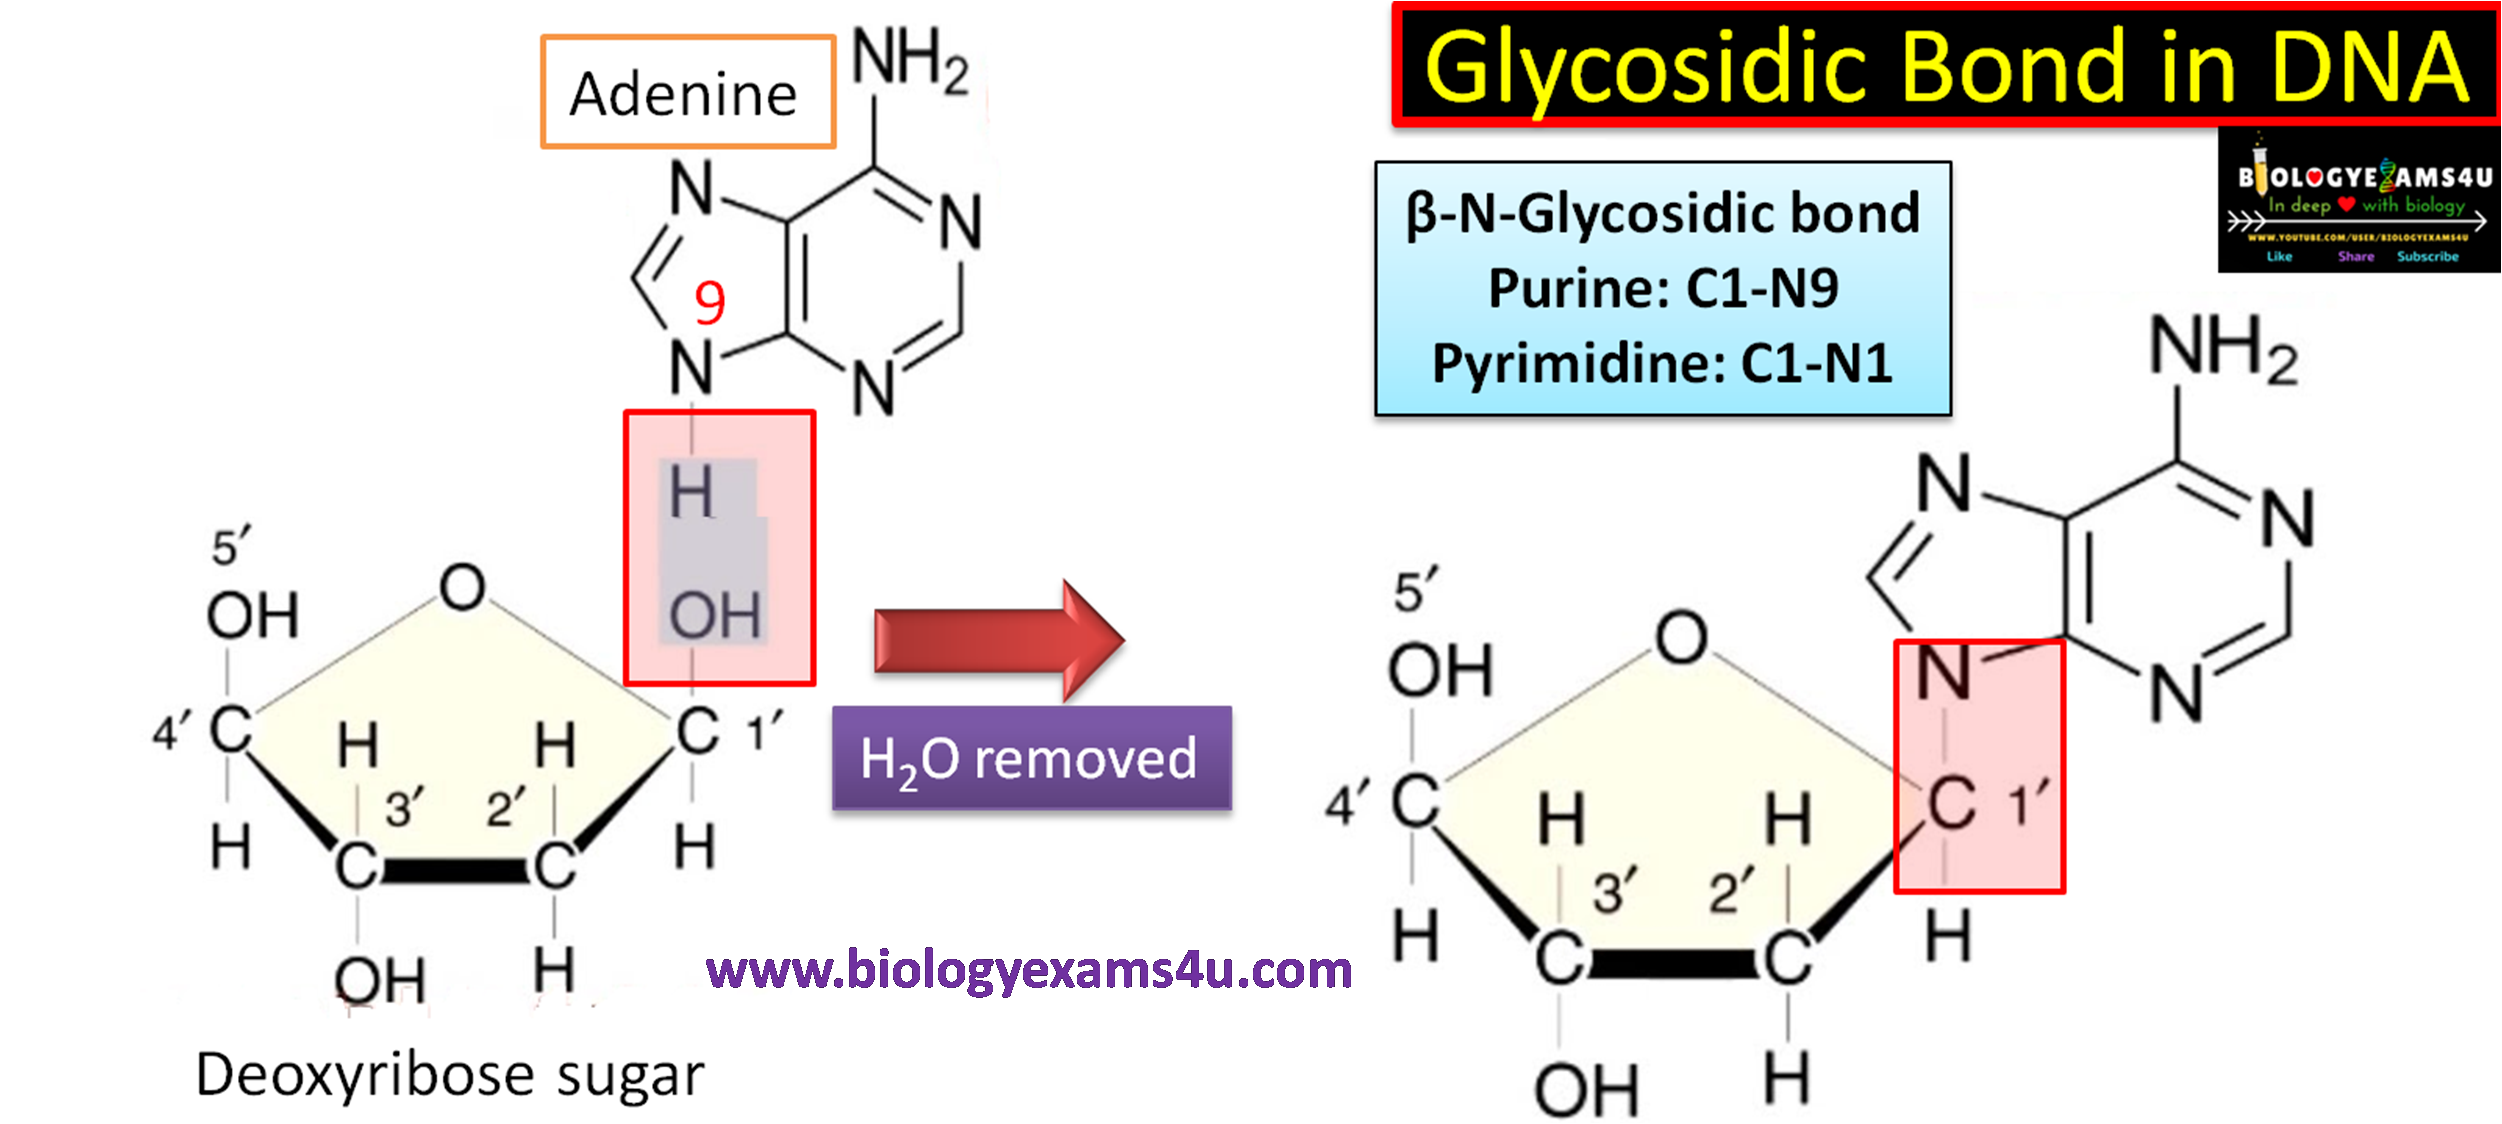 Where is Glycosidic Bond in DNA and RNA?